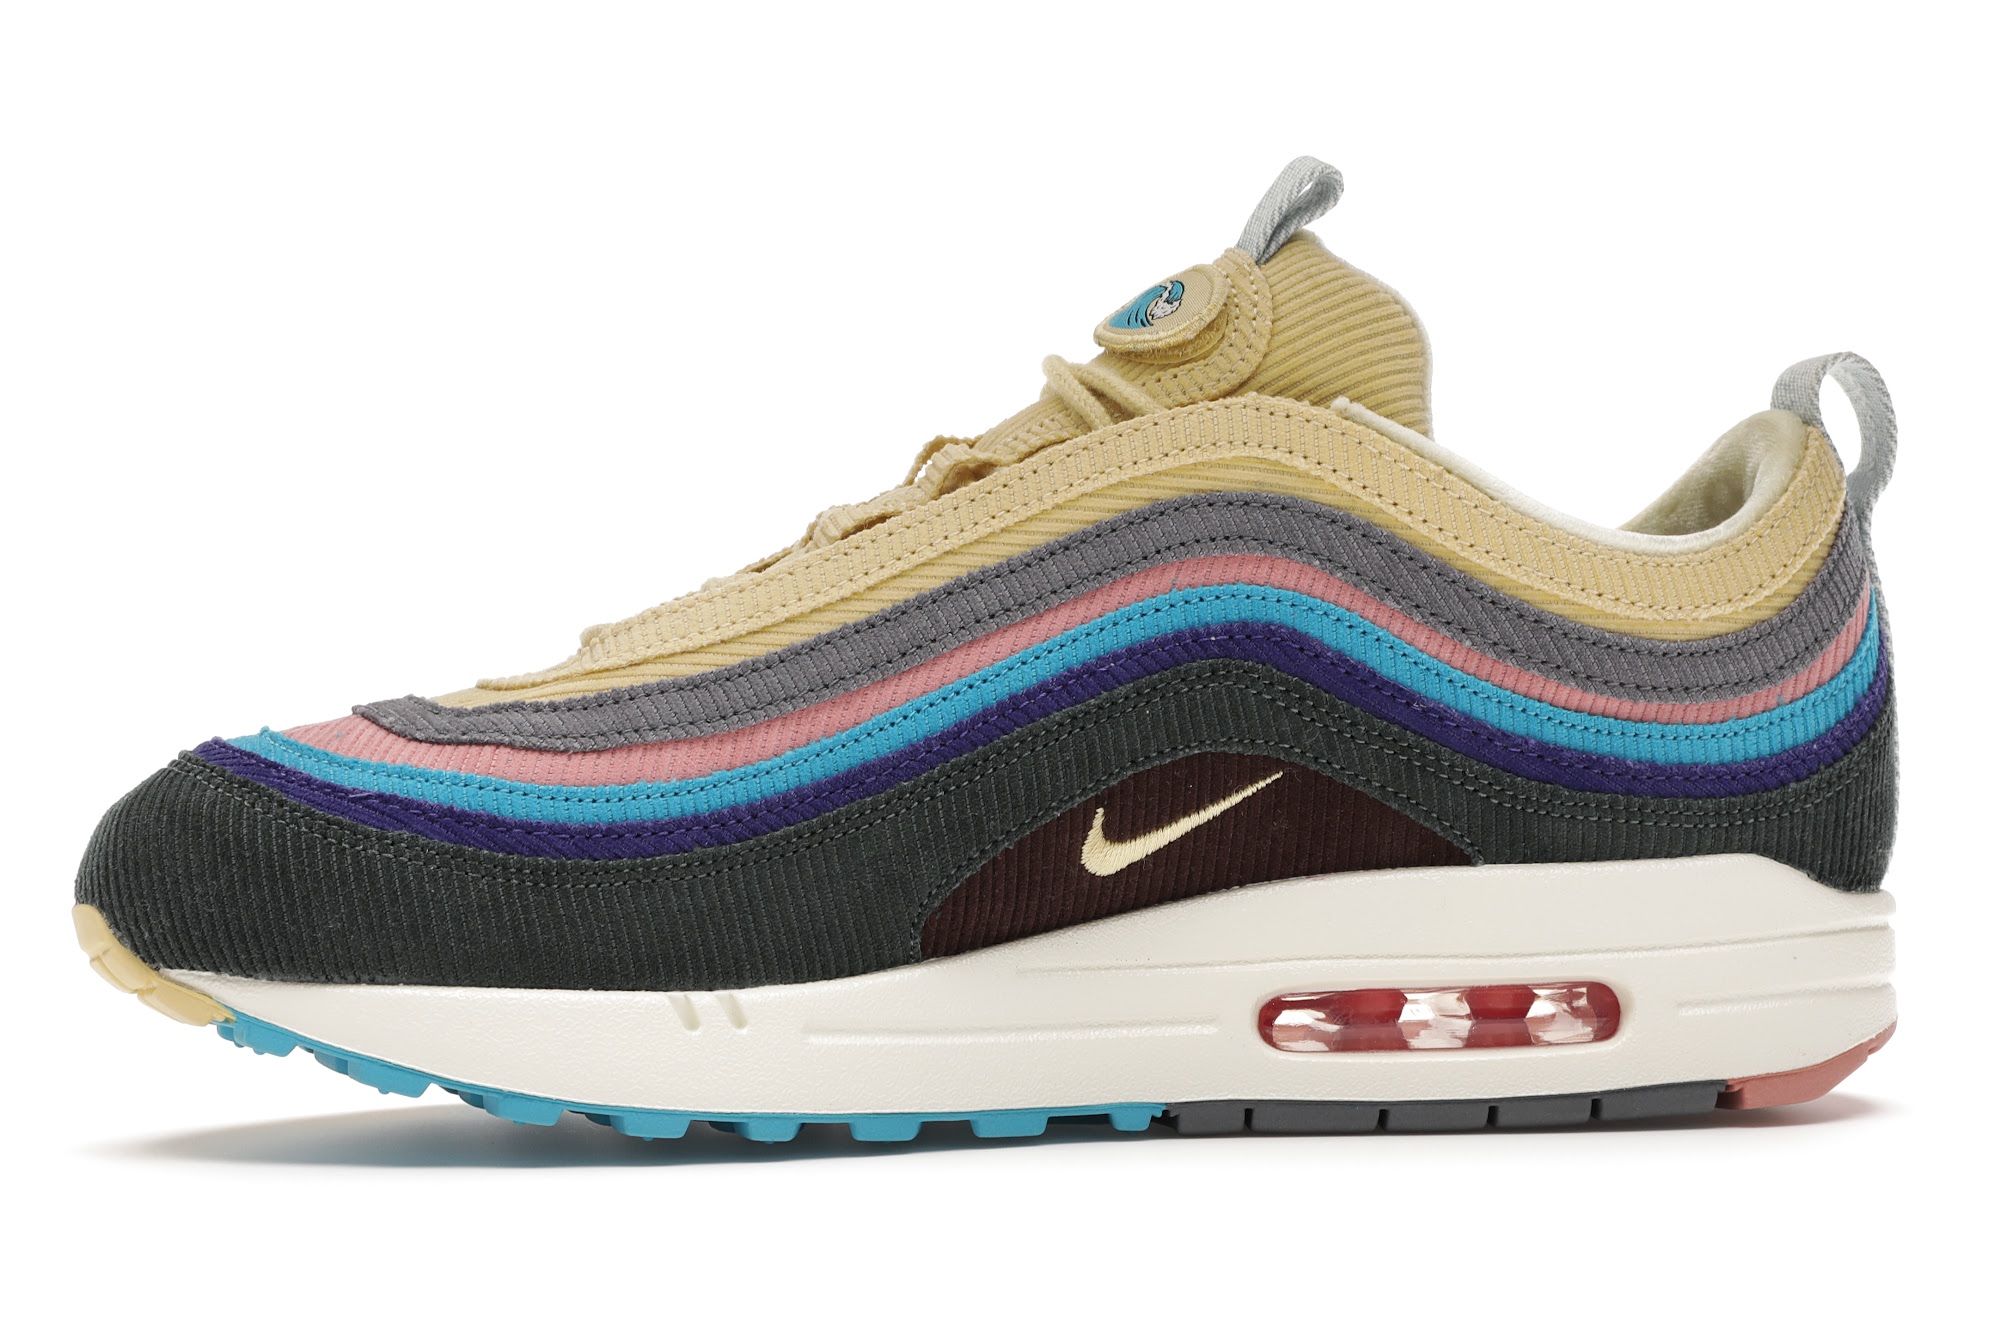 Buena voluntad pico Herencia Stockx Sean Wotherspoon Air Max Norway, SAVE 41% - aveclumiere.com